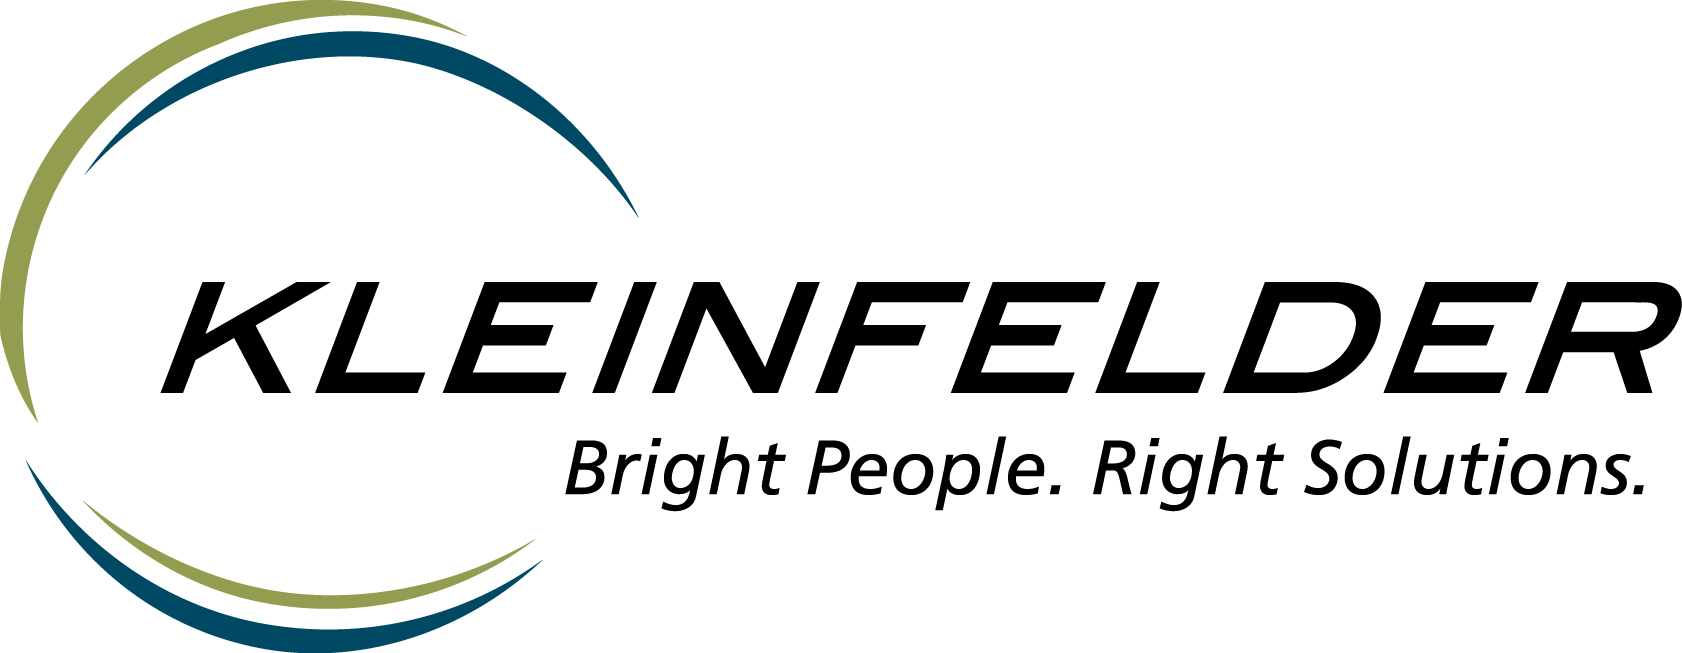 The word "Kleinfelder" in all caps, with the words "Bright People. Right Solutions." beneath it. There is an incomplete circle to the left of the words